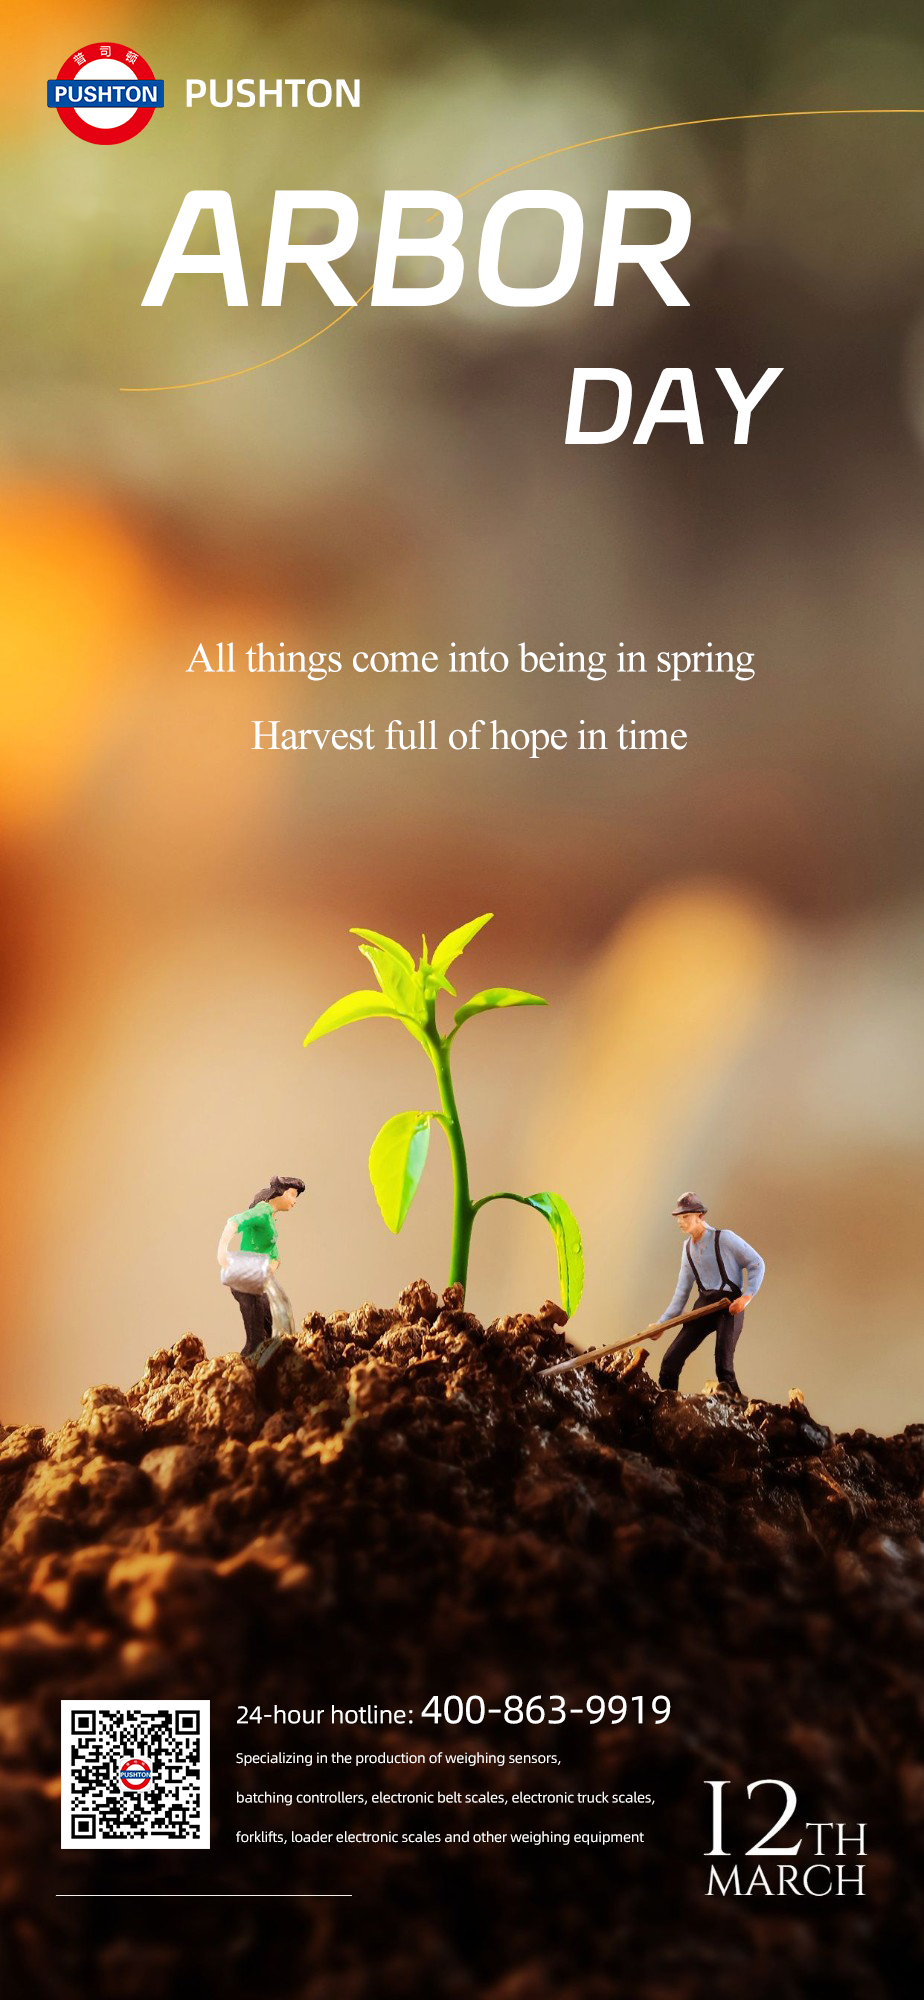 In the spring of March, all things grow